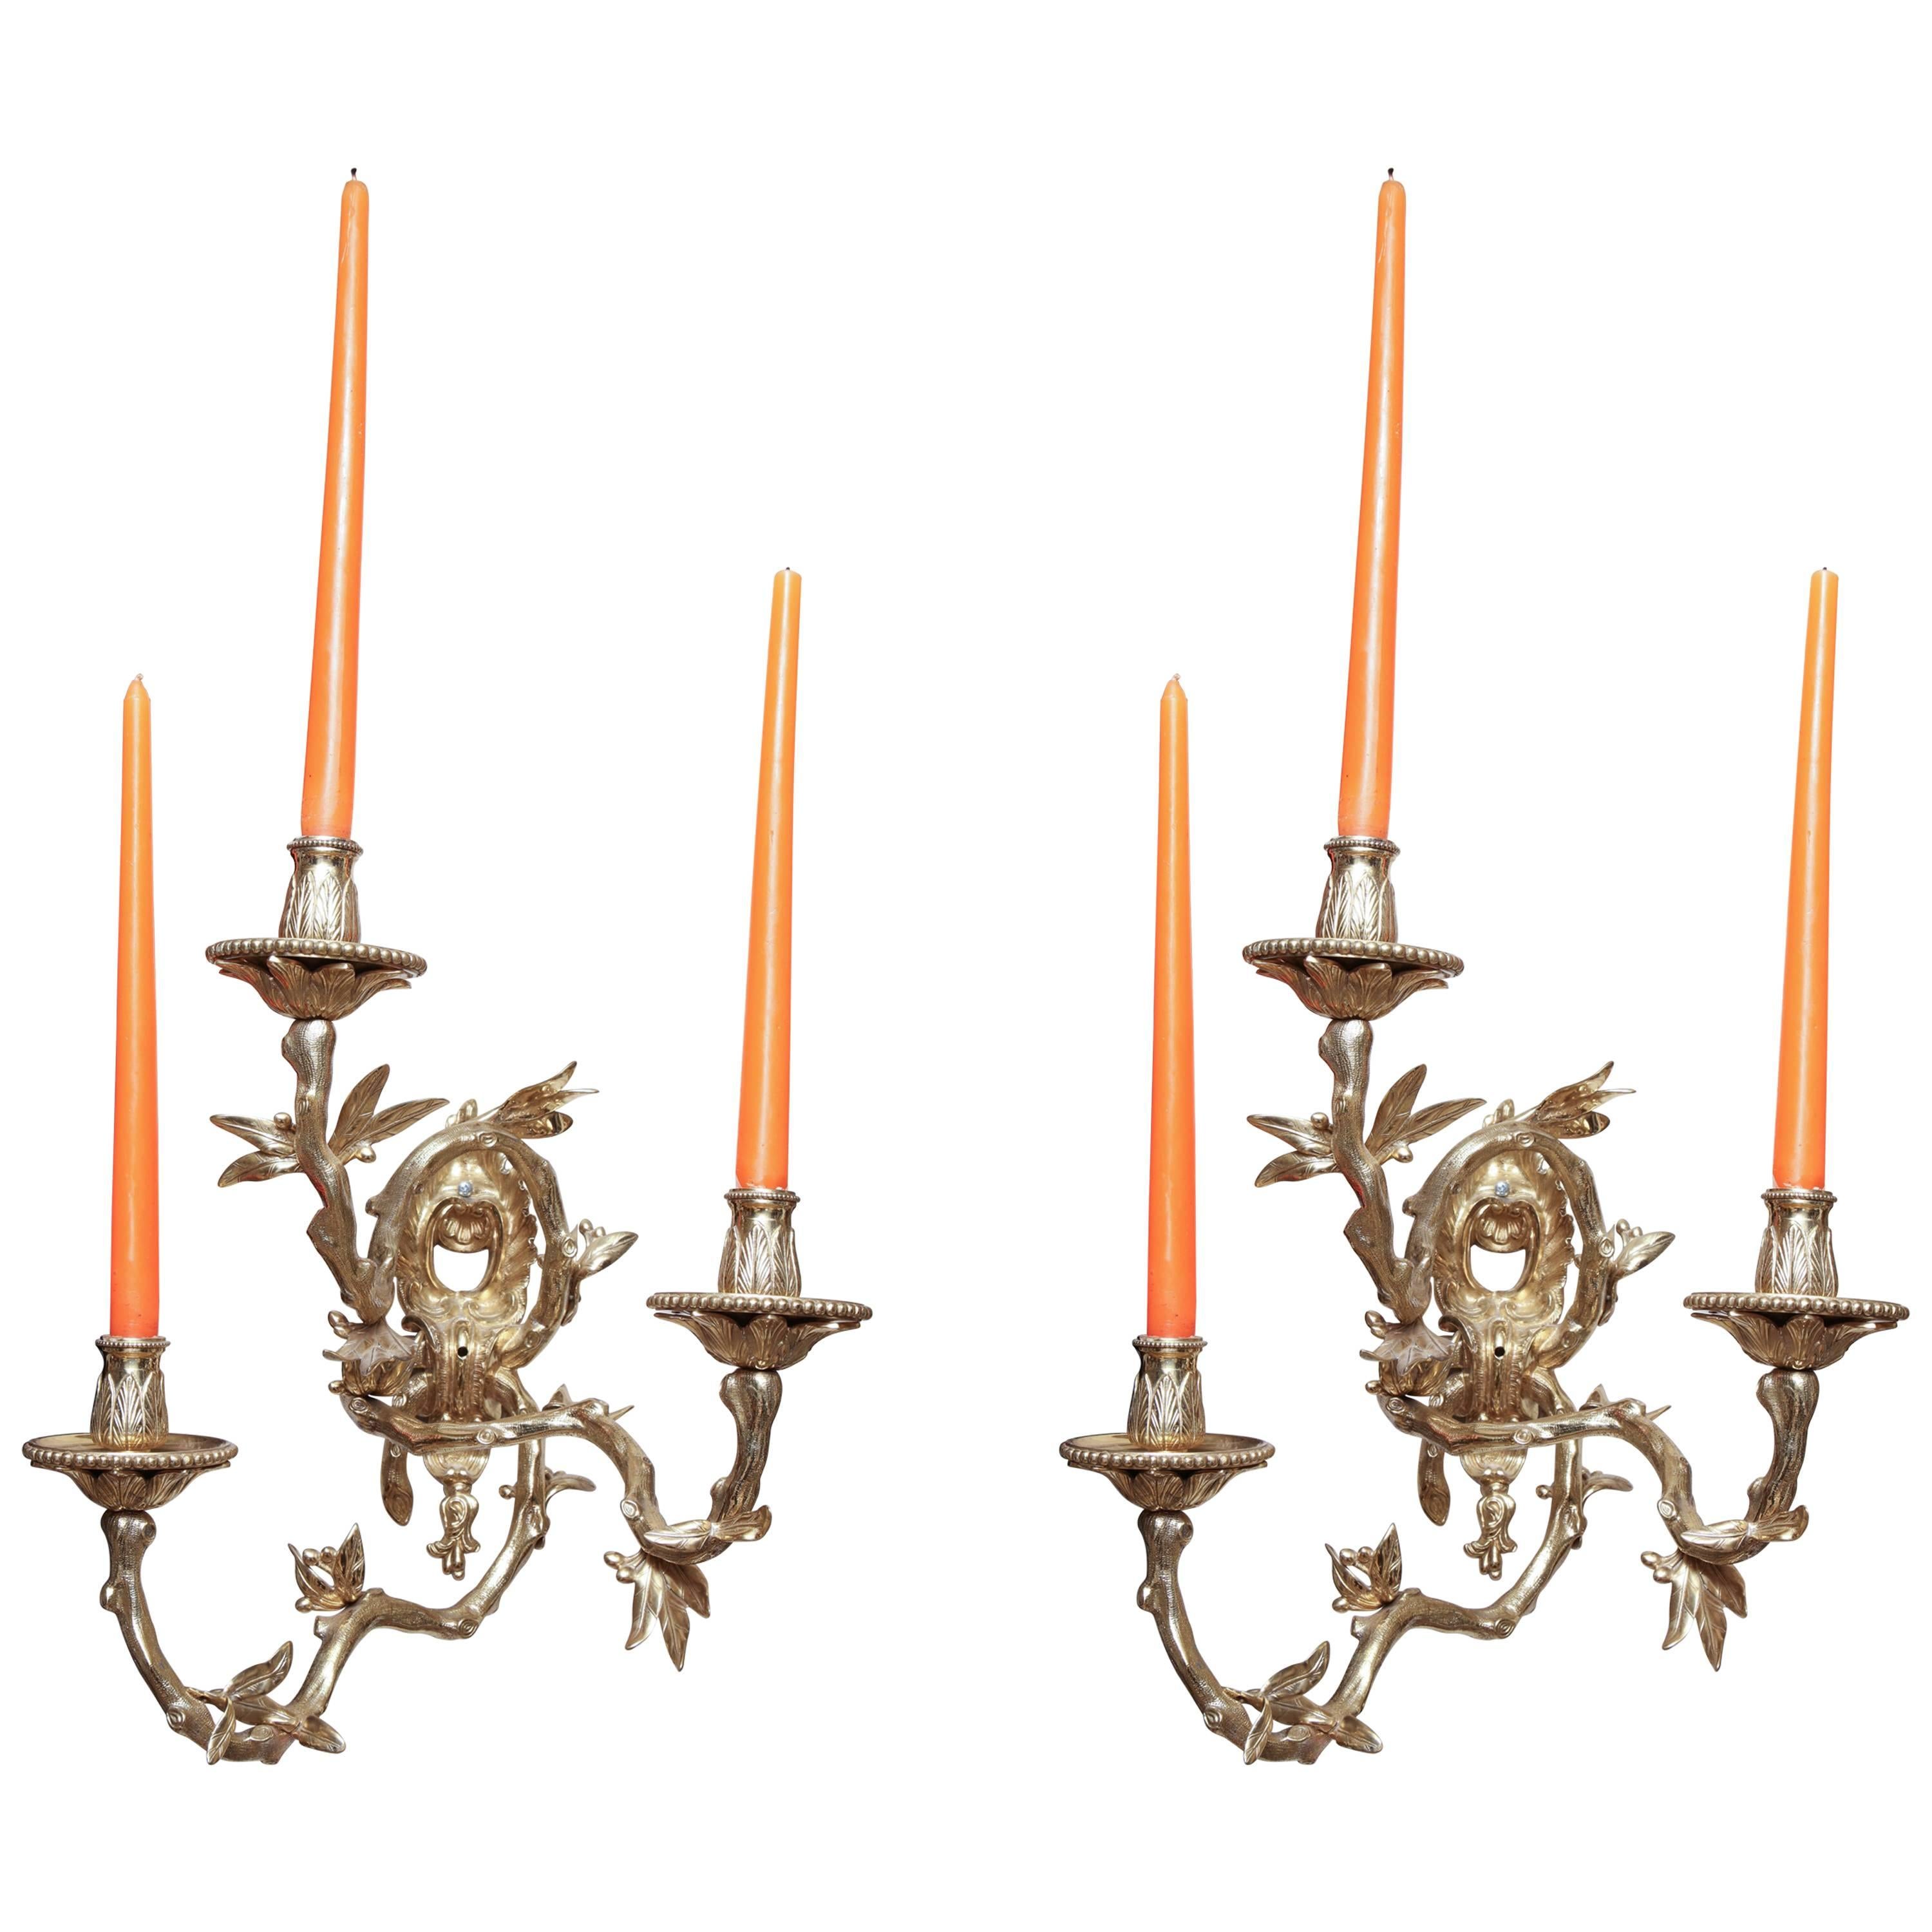 Pair of French Regence Bronze Wall Sconces